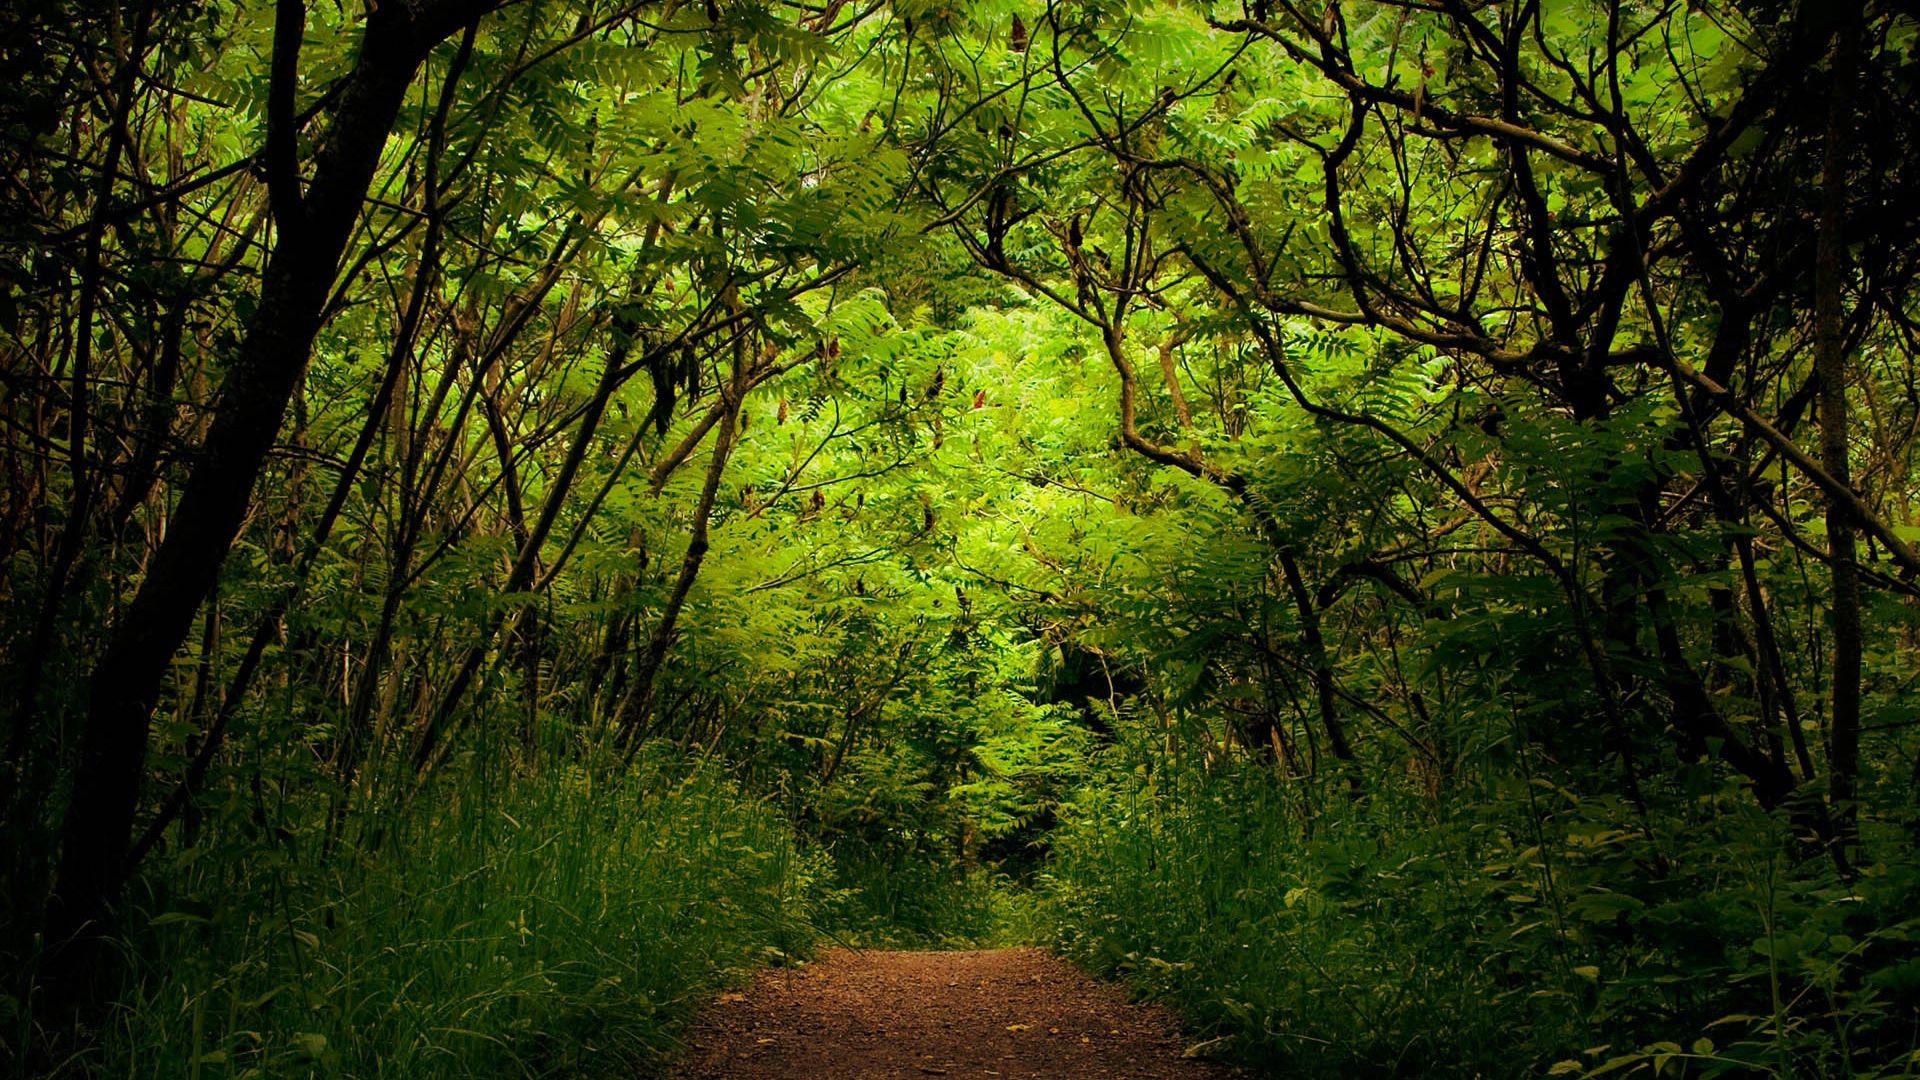 Download wallpaper 1920x1080 wood, path, track, green, uncertainty, jungle  hd background